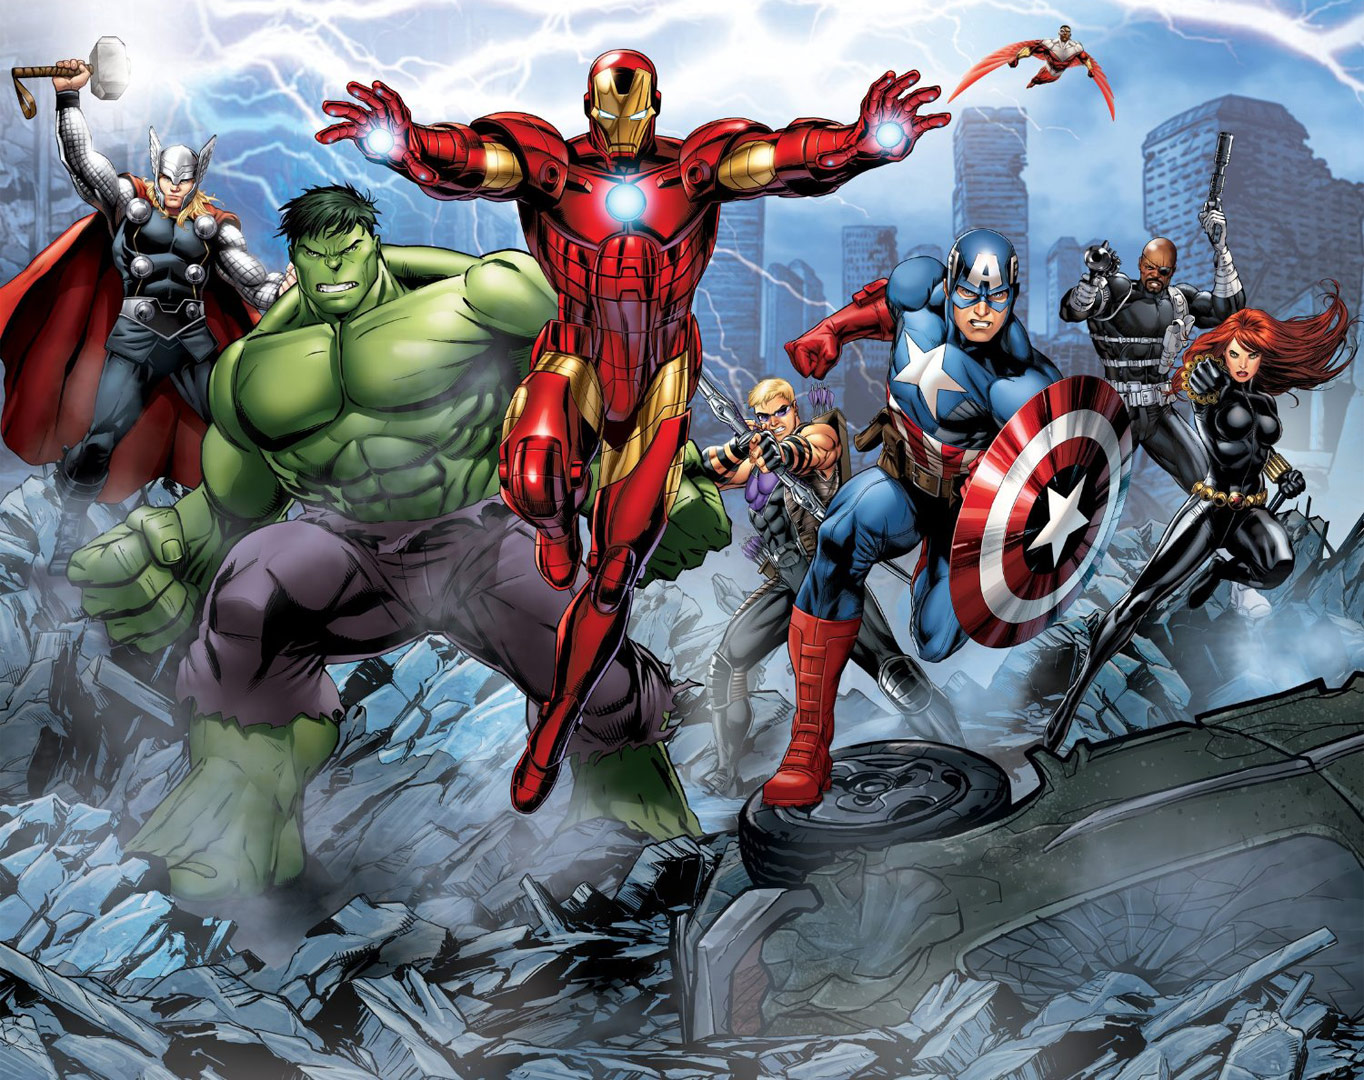 For An Epic Battle In Your Home With The Avengers Assemble Full Wall